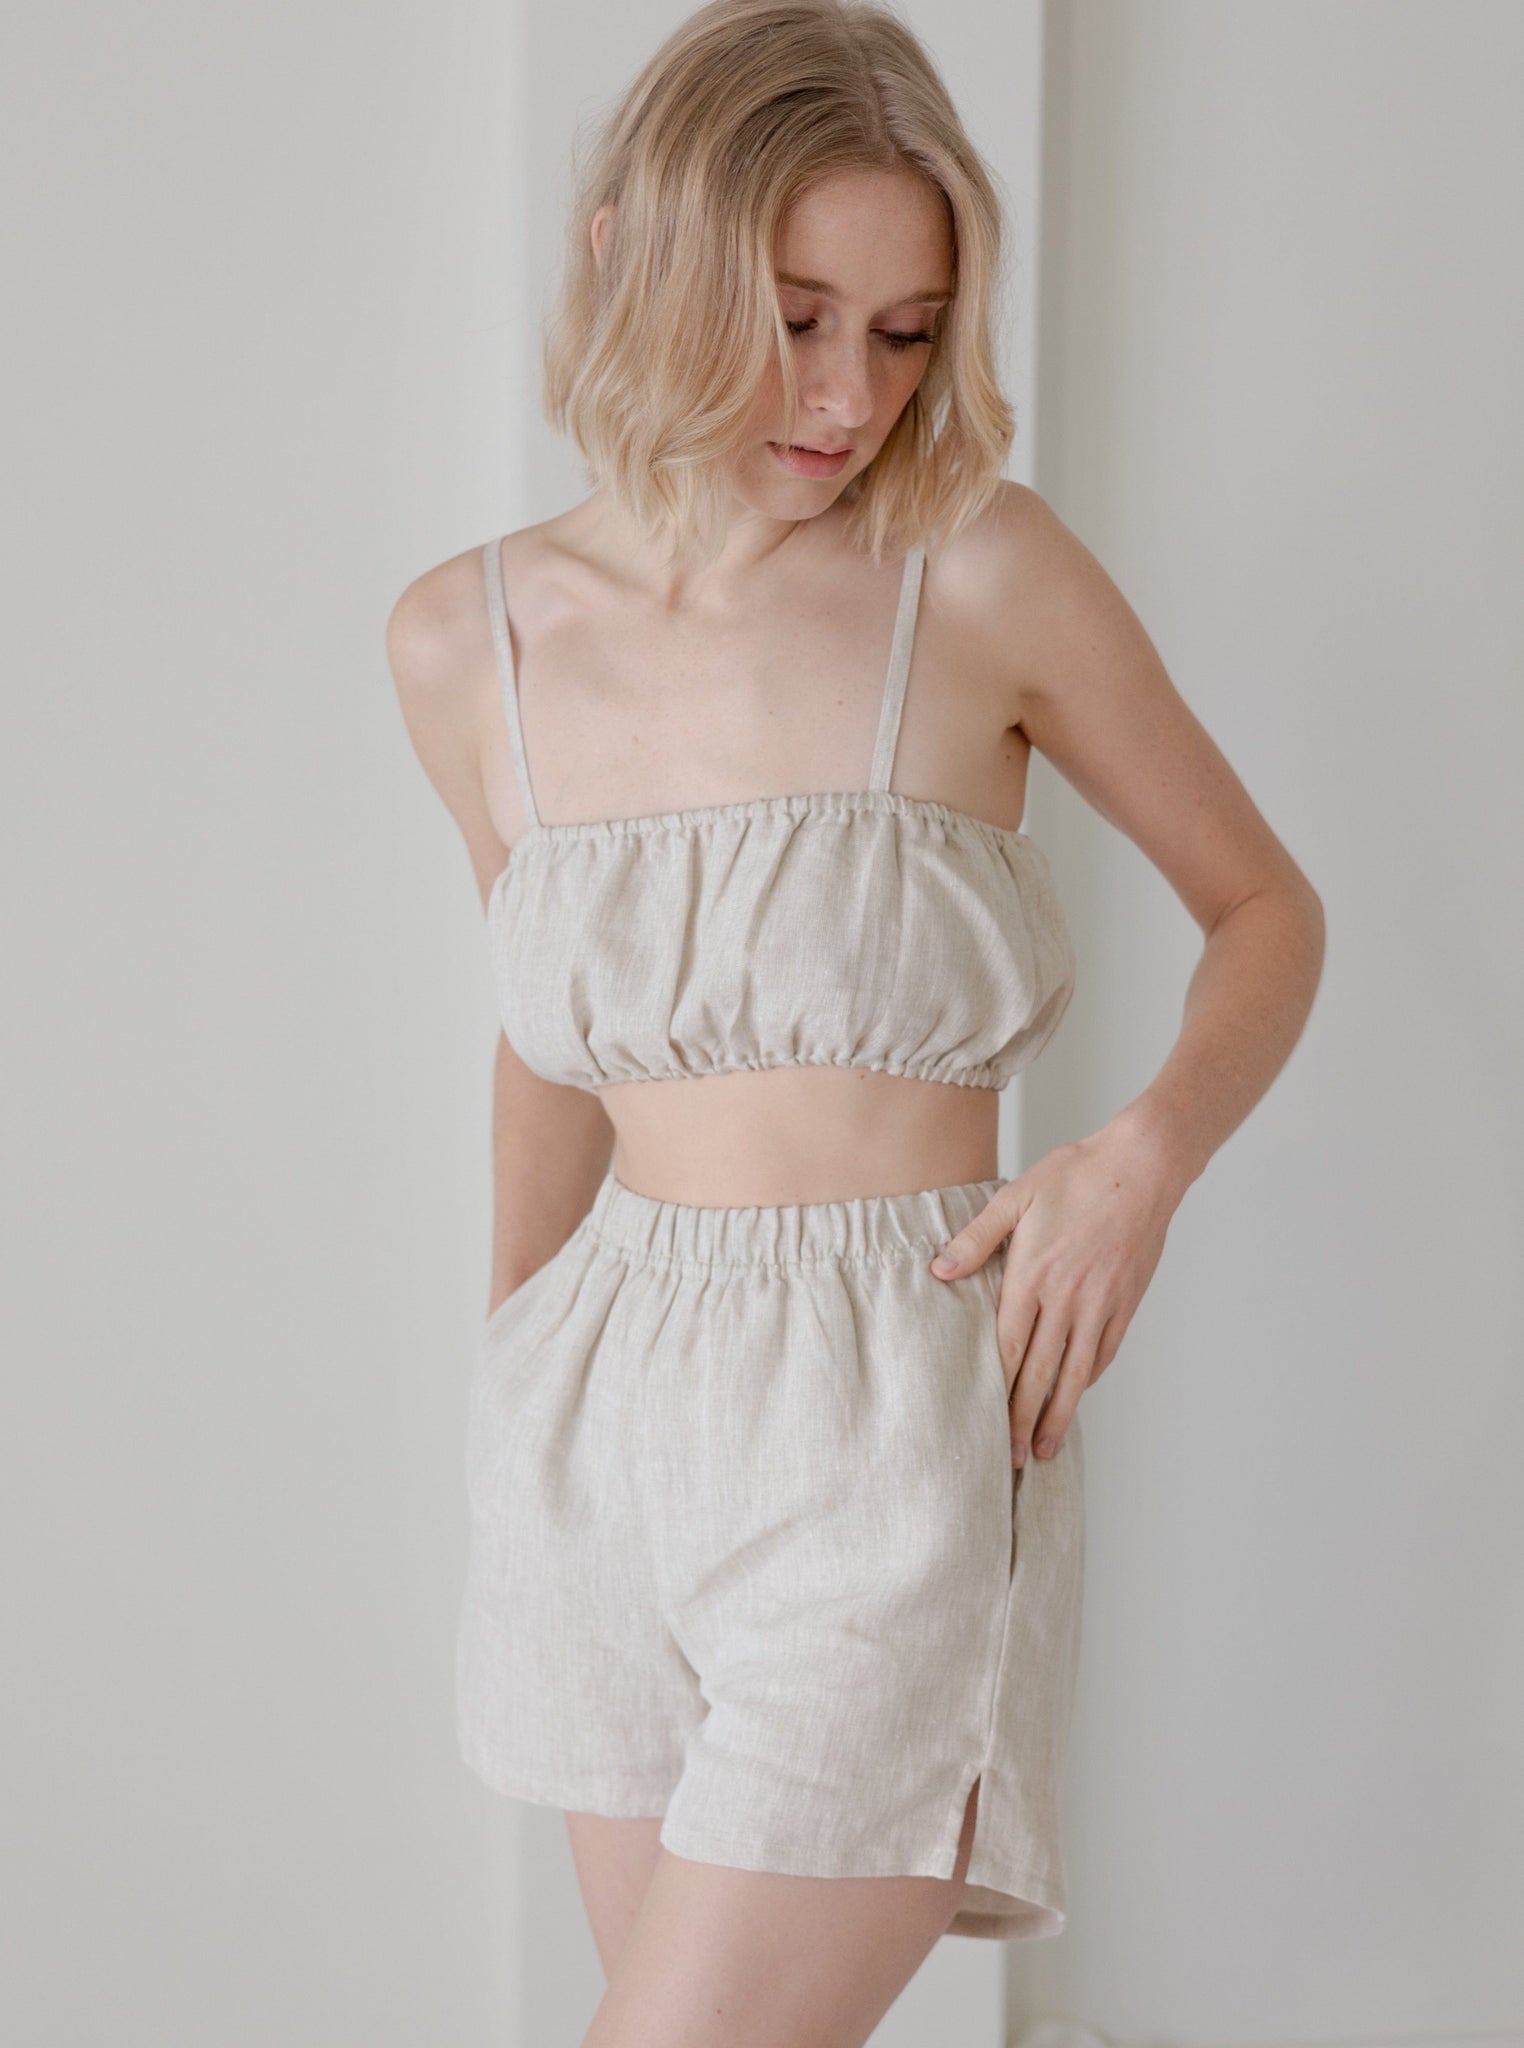 The model is wearing a white organic linen Elastic Bandeau - Natural - Sample and shorts.